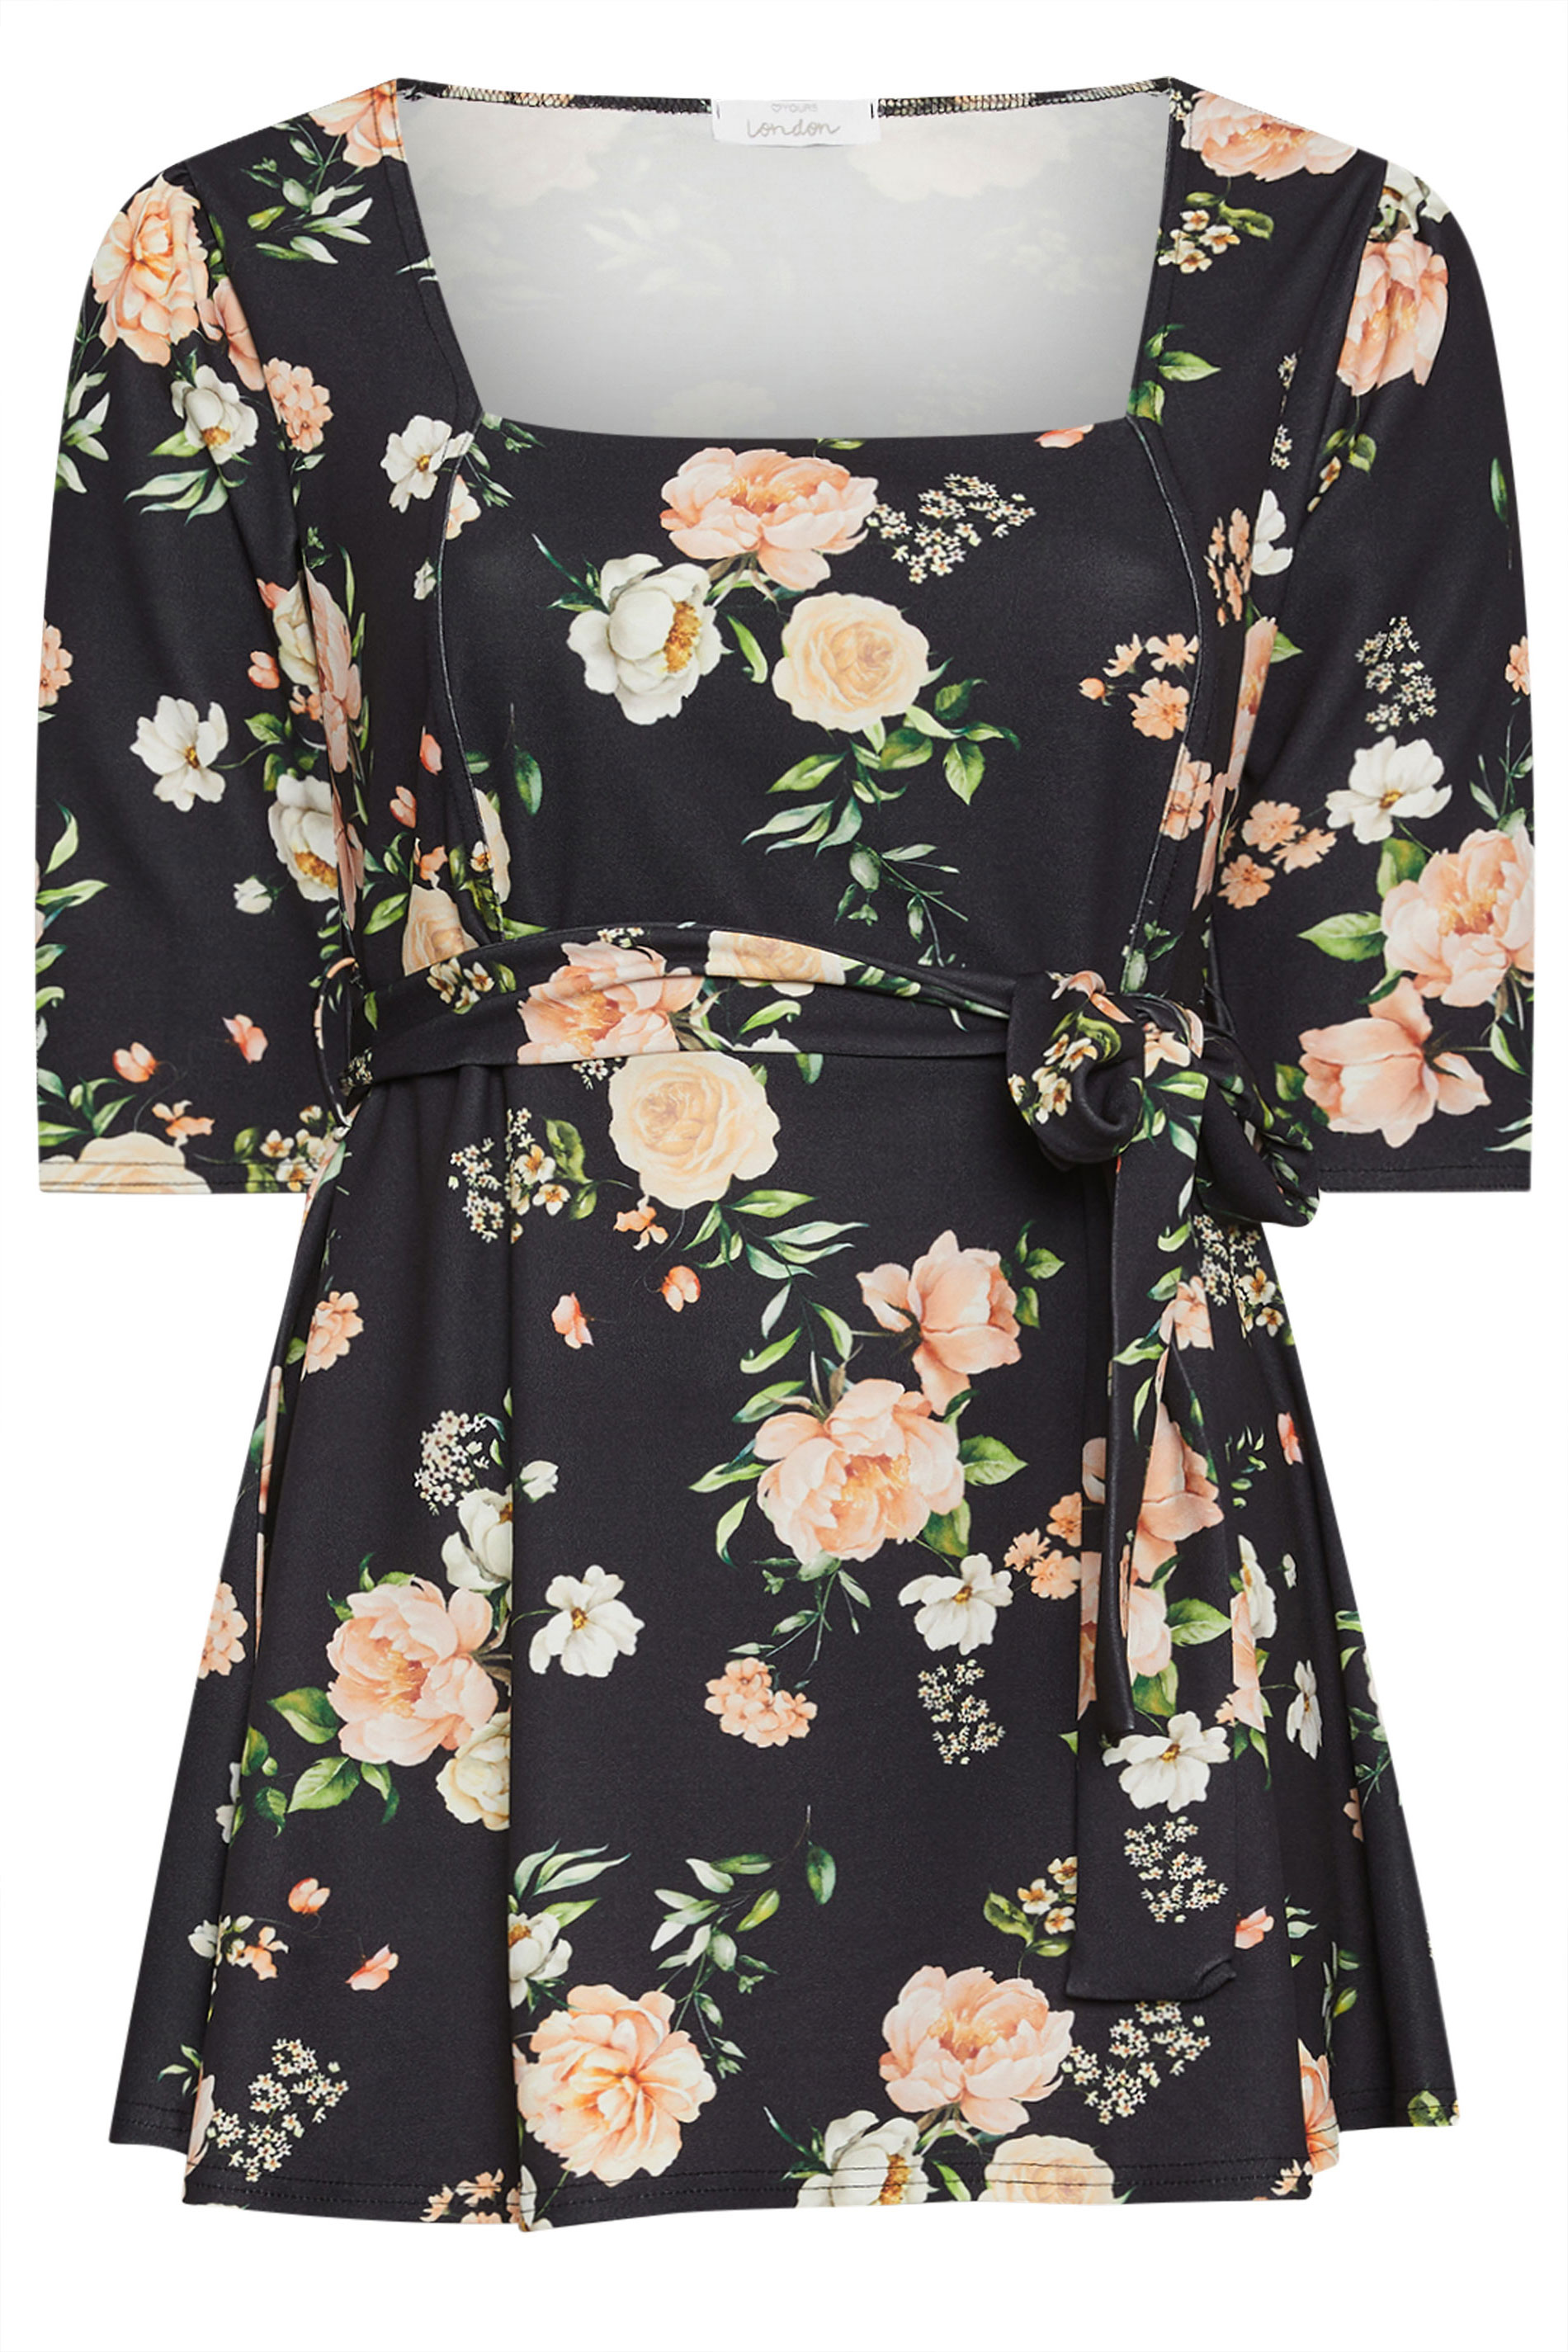 YOURS LONDON Plus Size Black Floral Print Square Neck Top | Yours Clothing 2